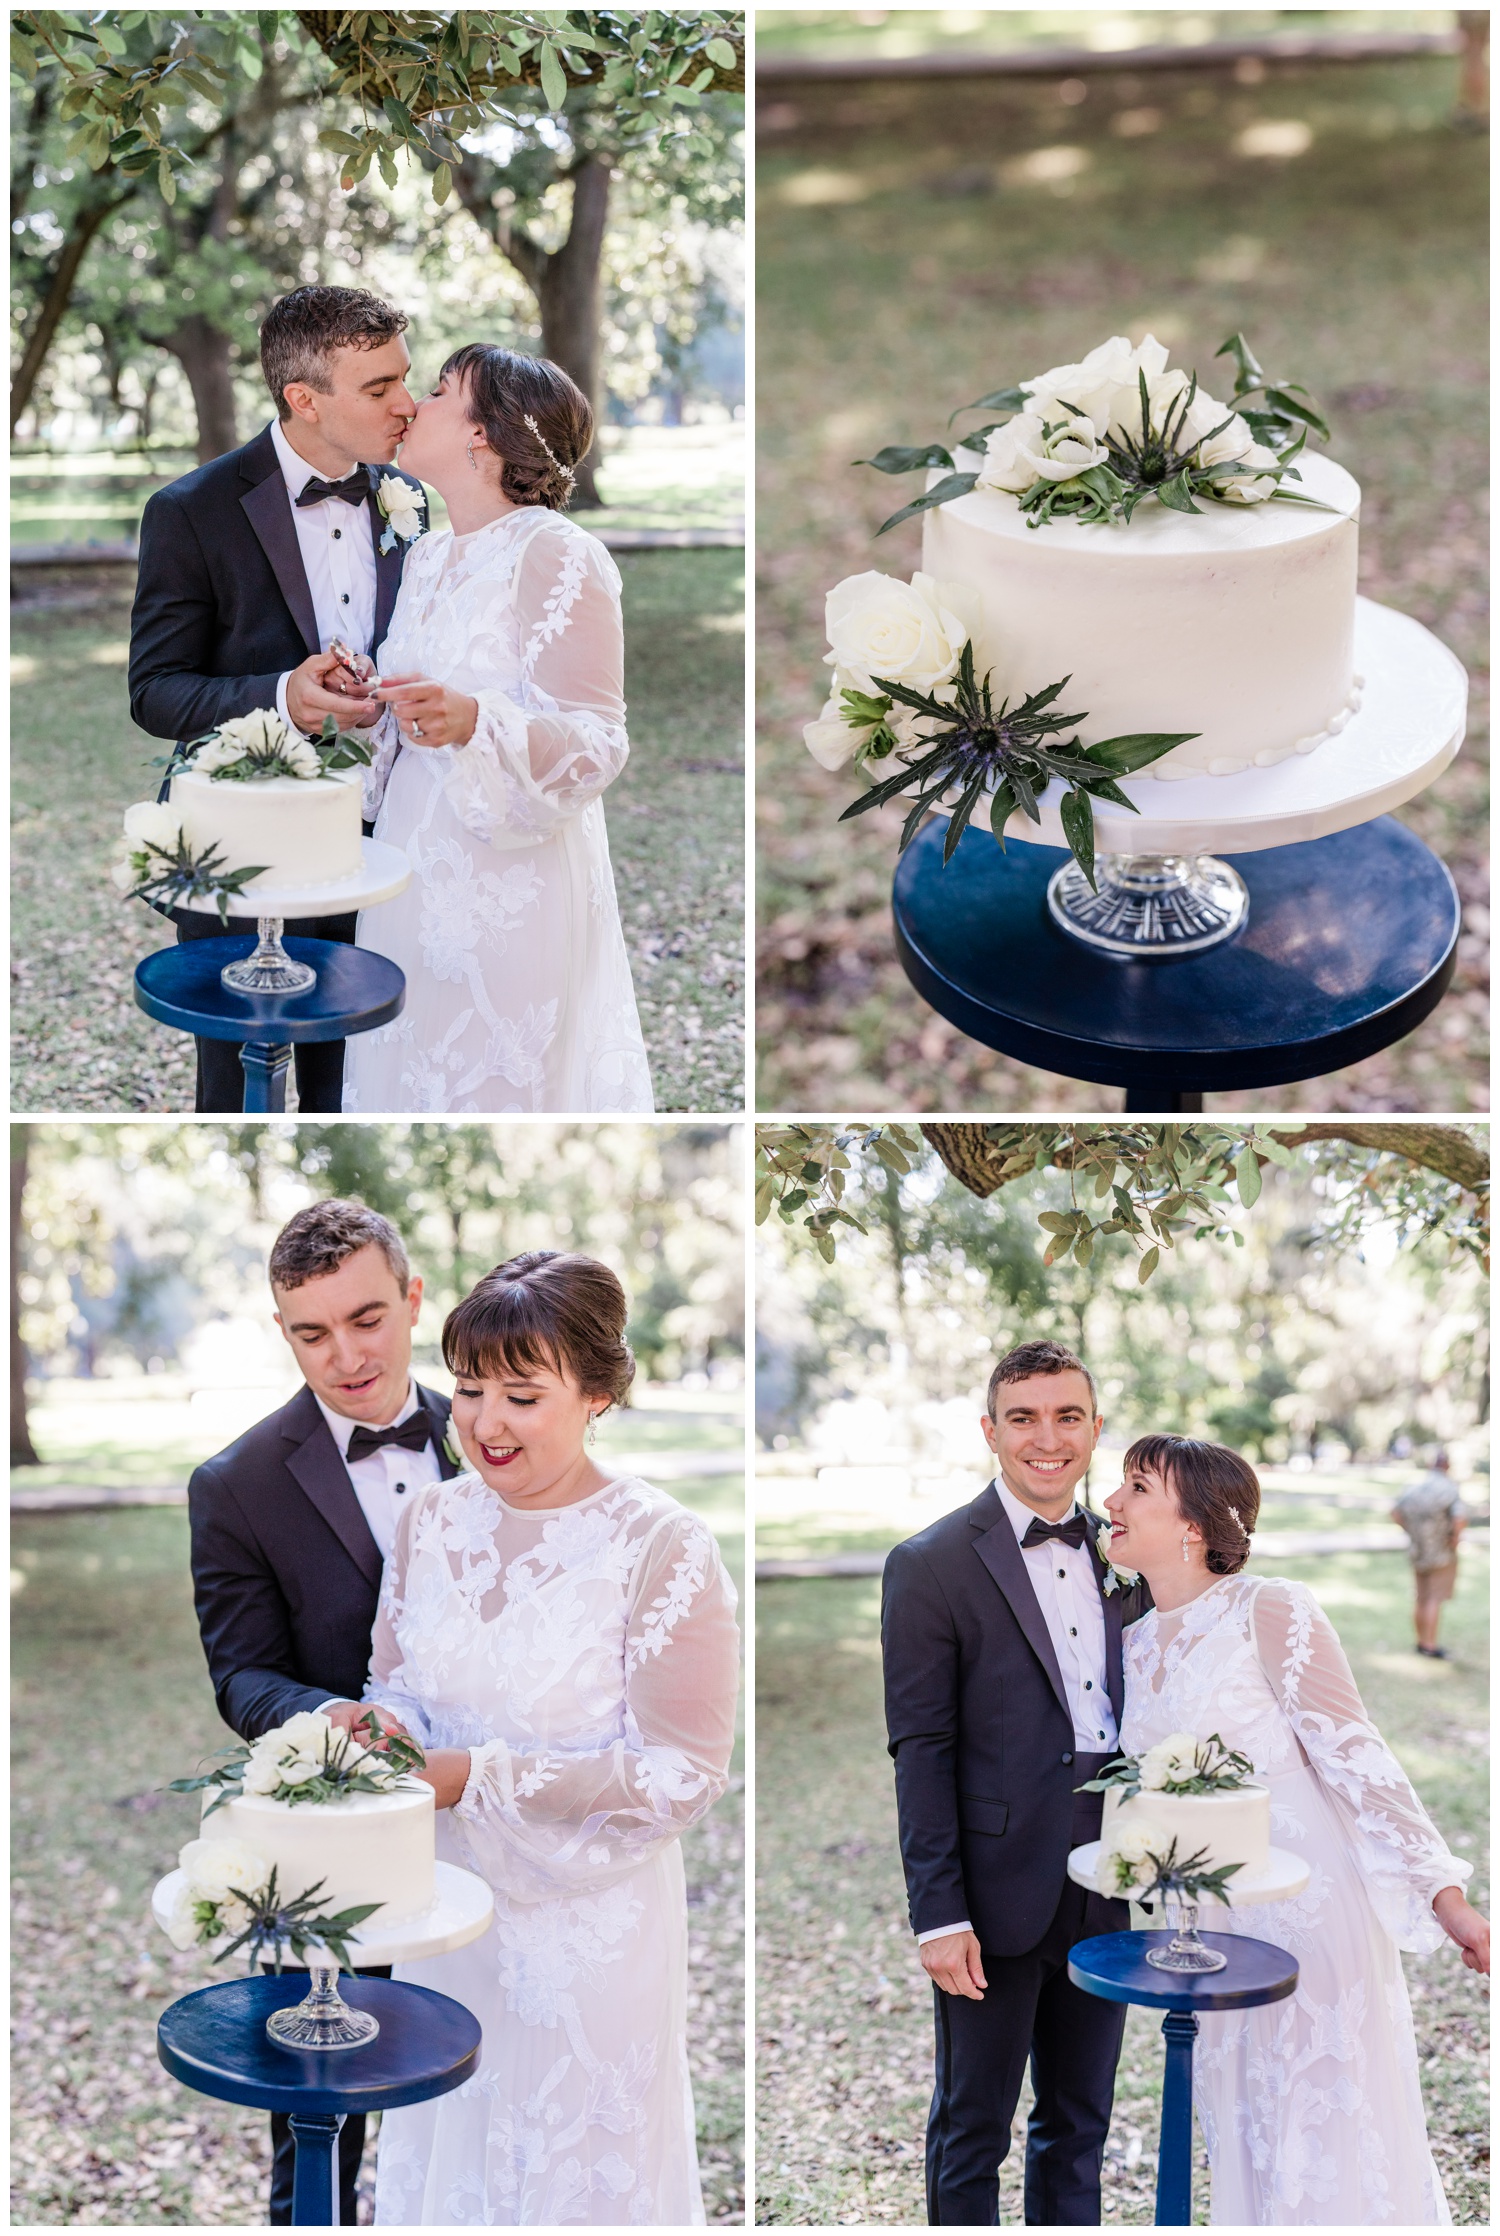 ceremony under the oaks - cake cutting in forsyth park - apt b photography - cake by wicked cakes of savannah